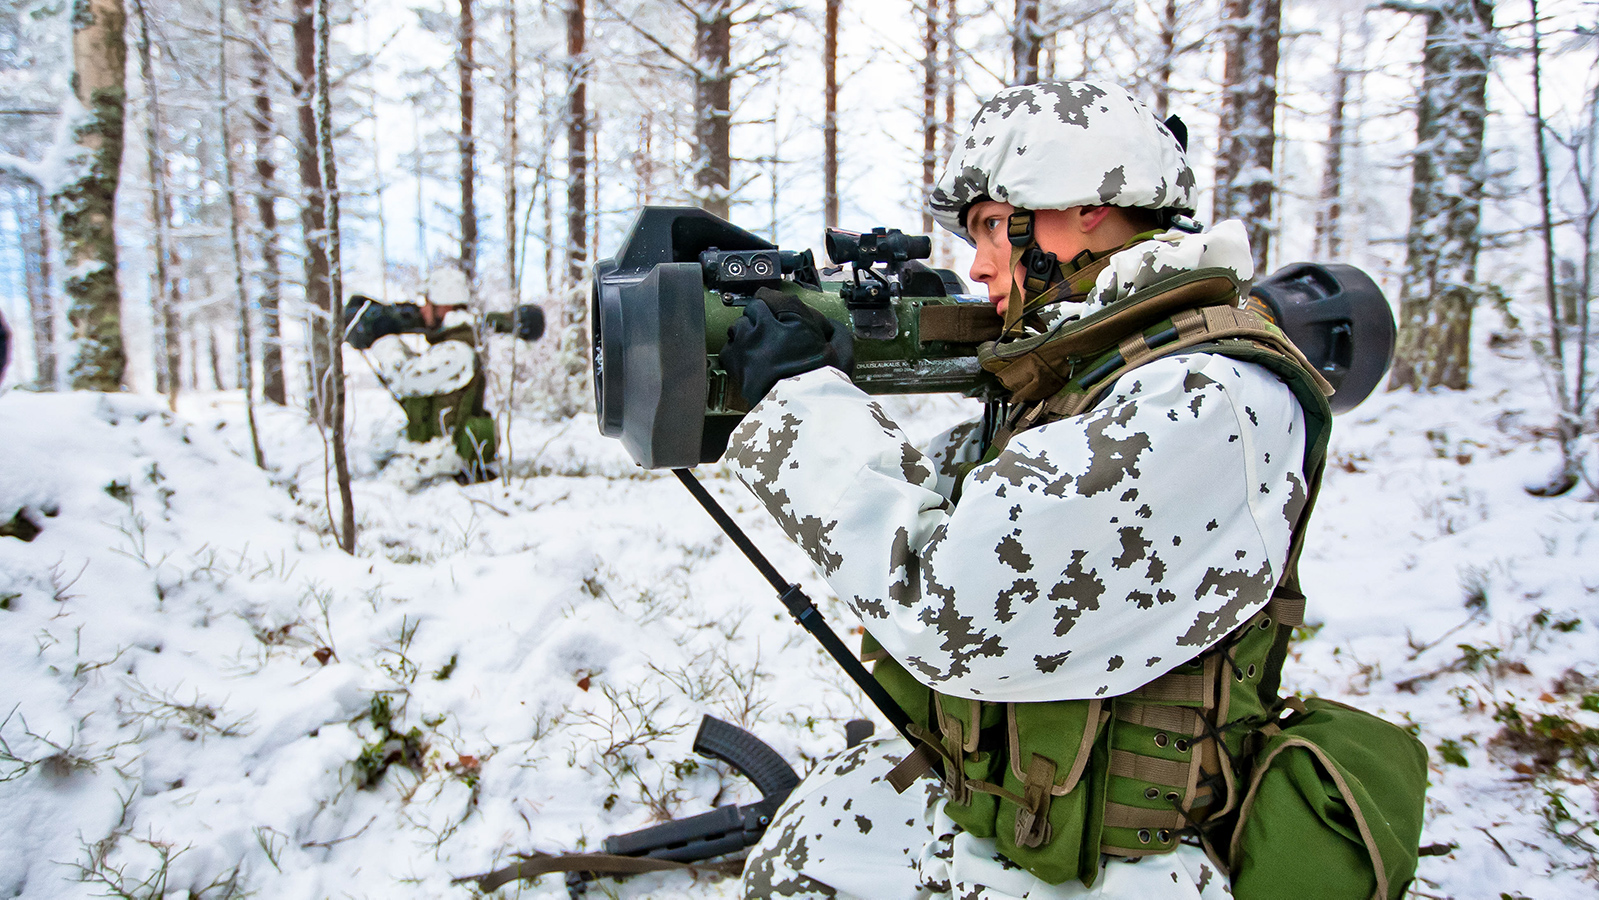 The Finnish Army on manoeuvres with the NLAW light anti-tank weapon - primarily intended for use against heavy armoured vehicles, but it is also suitable for destroying infantry fighting vehicles and light armoured vehicles as well as weapon positions.  The NLAW is a disposable, fire-and-forget anti-tank weapon intended for use by individual soldiers.   The missile uses predicted line of sight, PLOS, for homing on targets. The missile may engage a target by direct attack, DA, or overflight top attack, OTA.